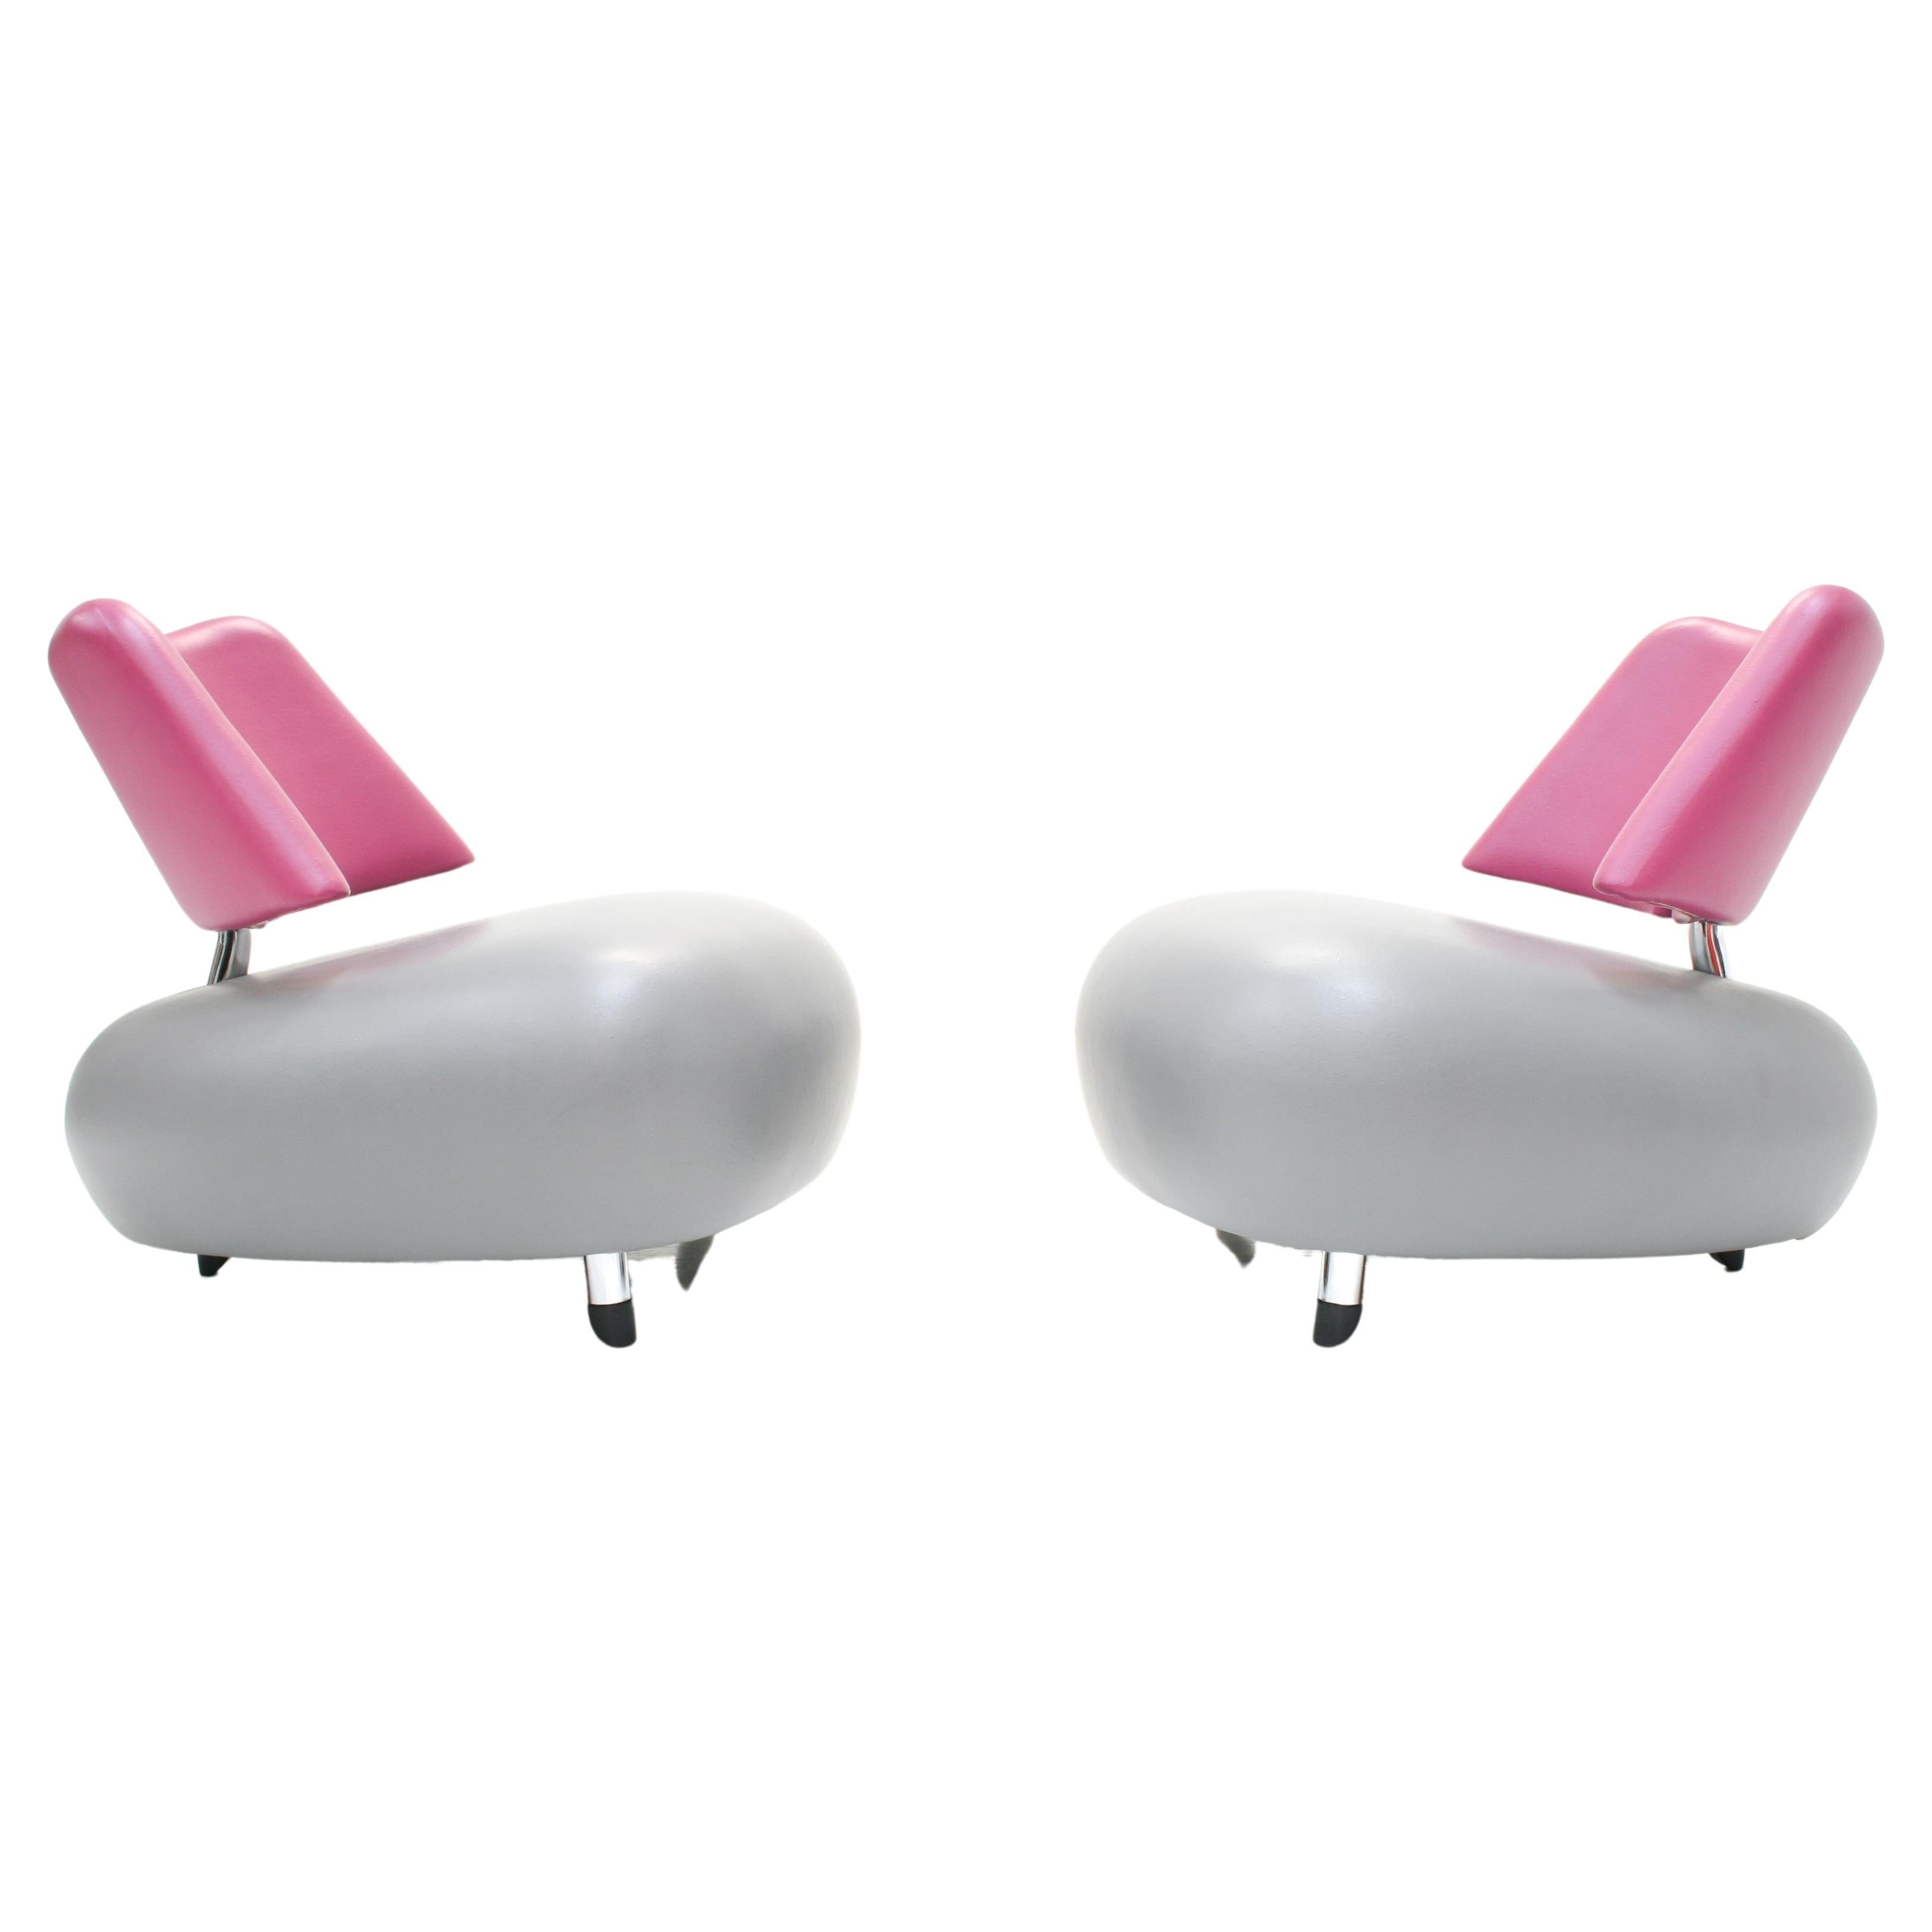 1980s Rubber Pallone Pa Lounge Chairs by Roy De Scheemaker for Leolux, Set of 2 For Sale